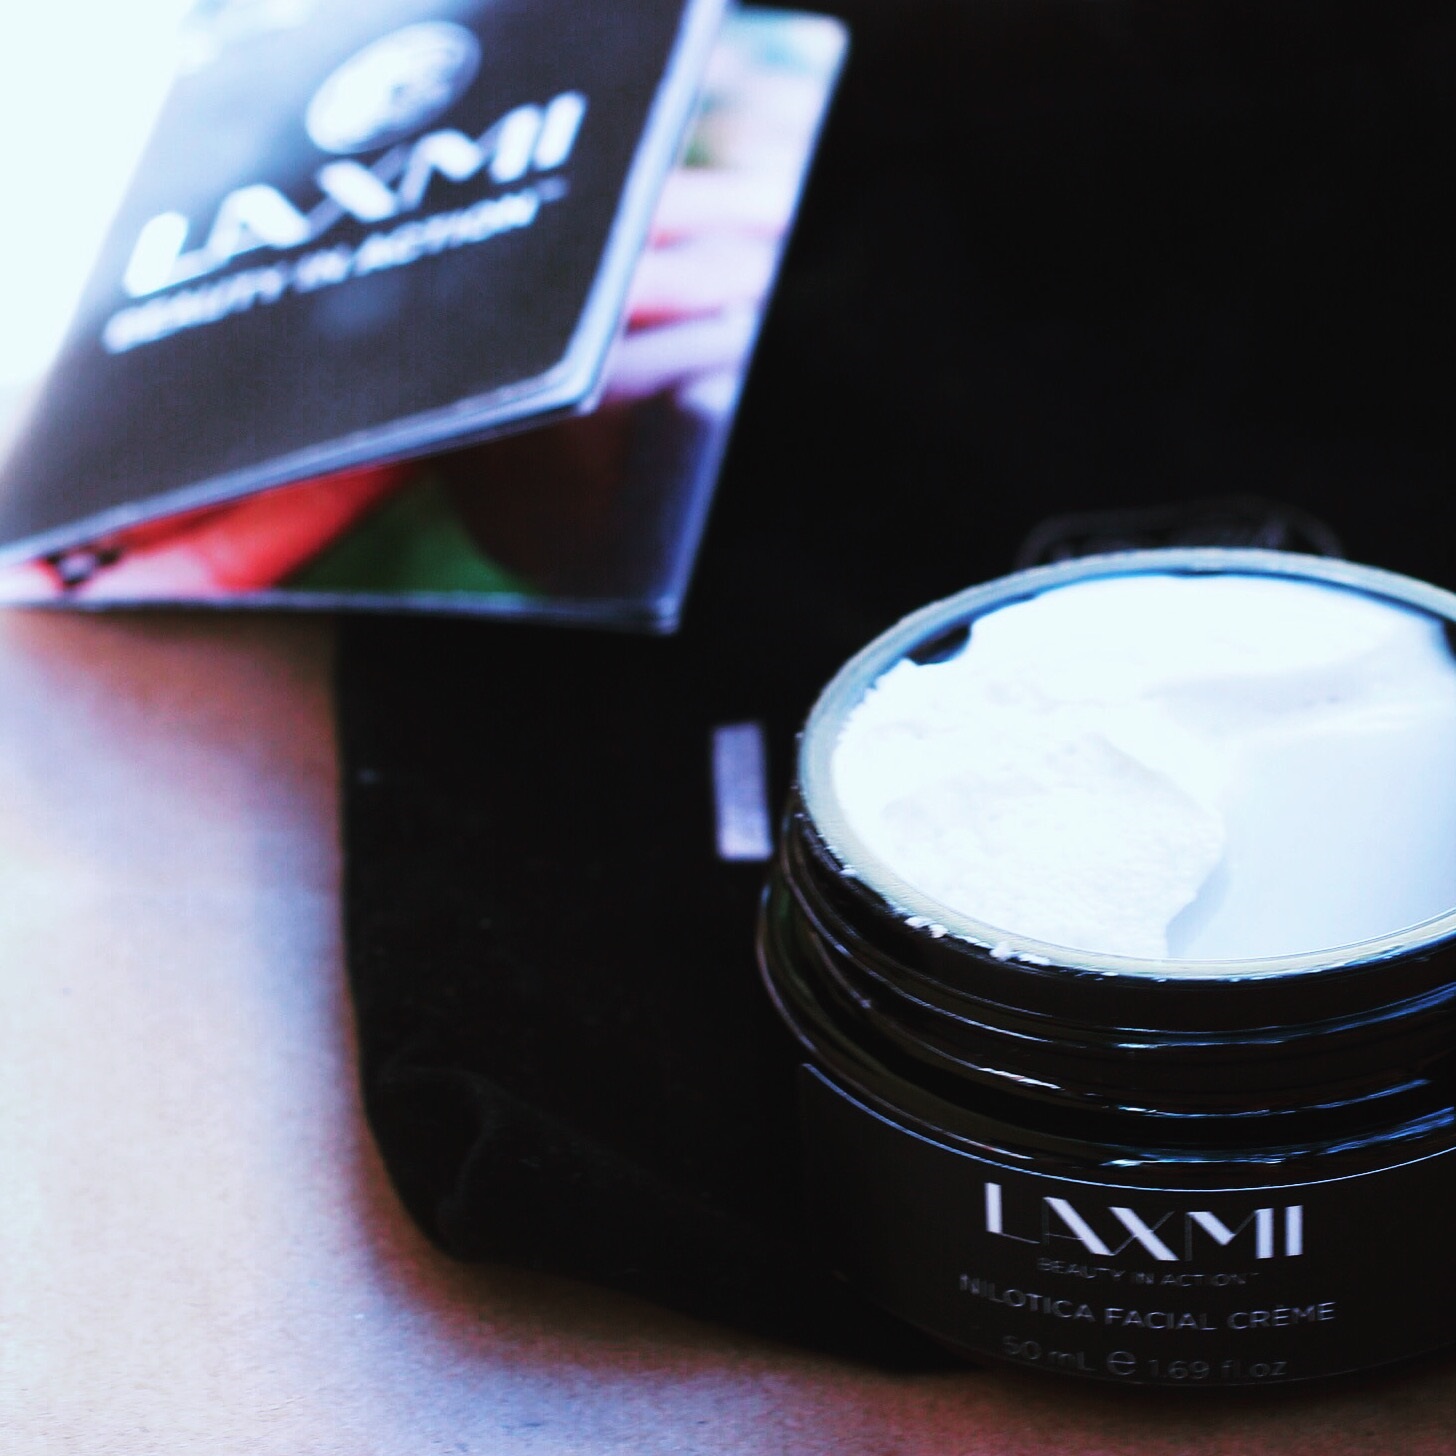 Laxmi product review on Belle Meets World blog